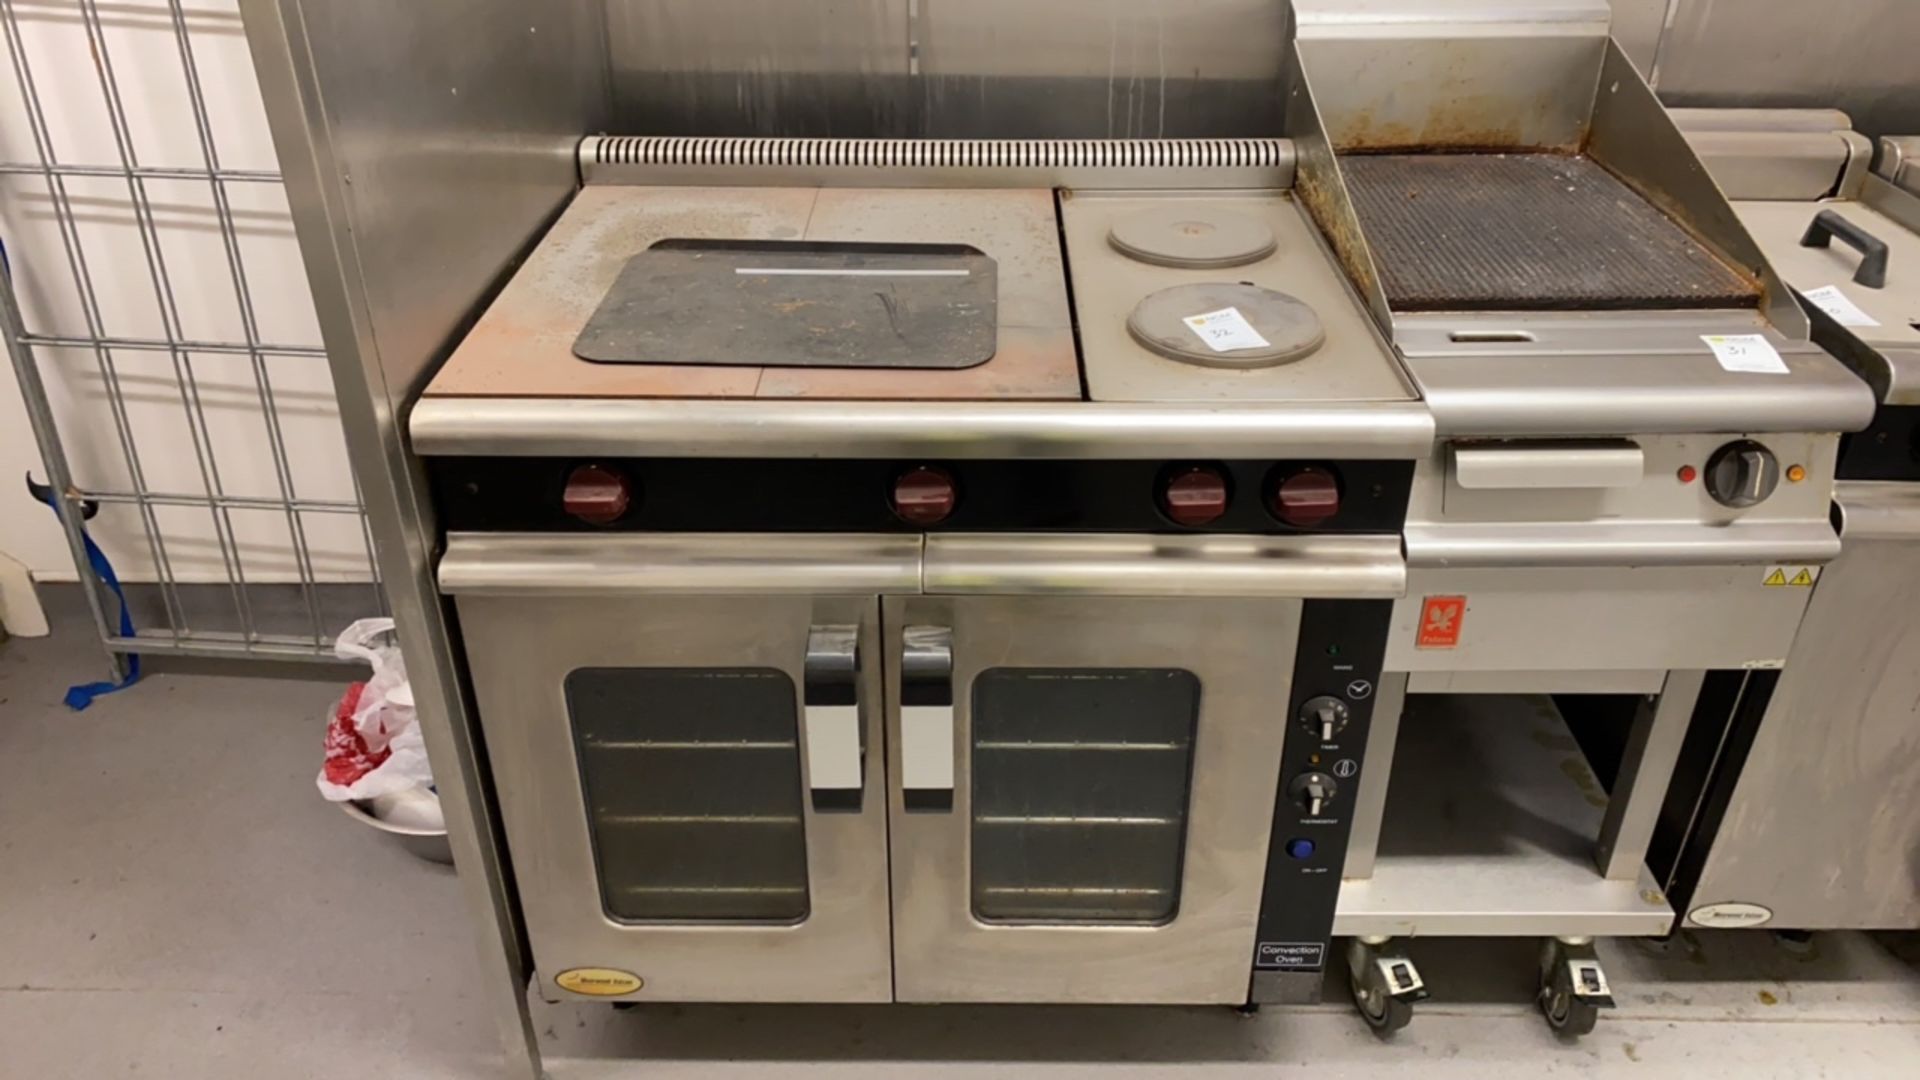 Moorwood Vulcan oven with hot plate